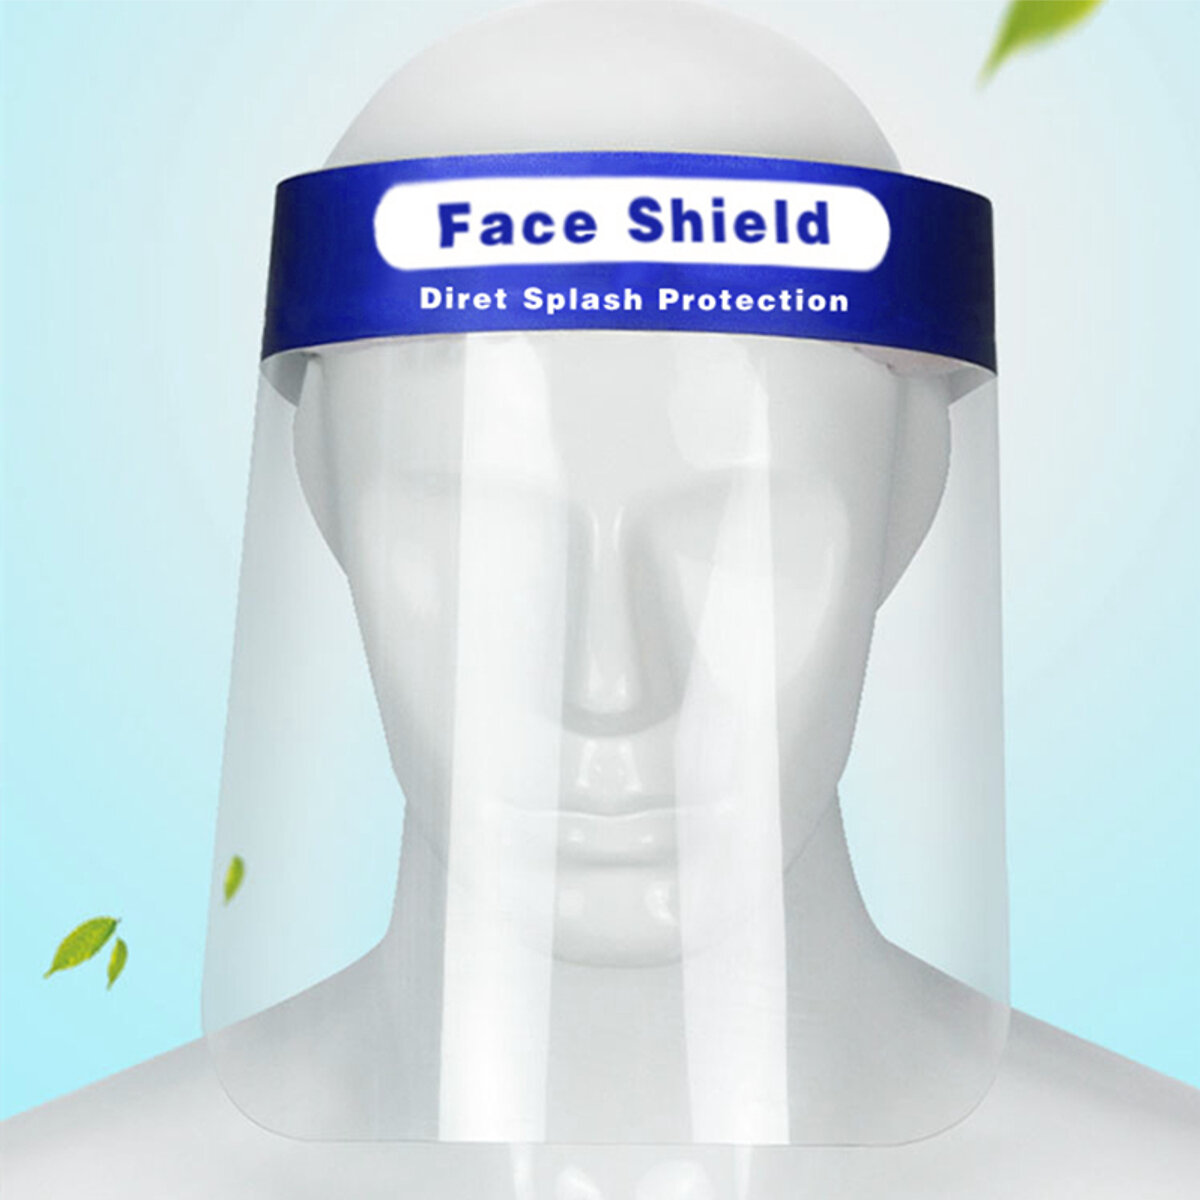 Safety Full Face Mask Respirator For Painting Spraying Anti-Fog Facepiece Mask